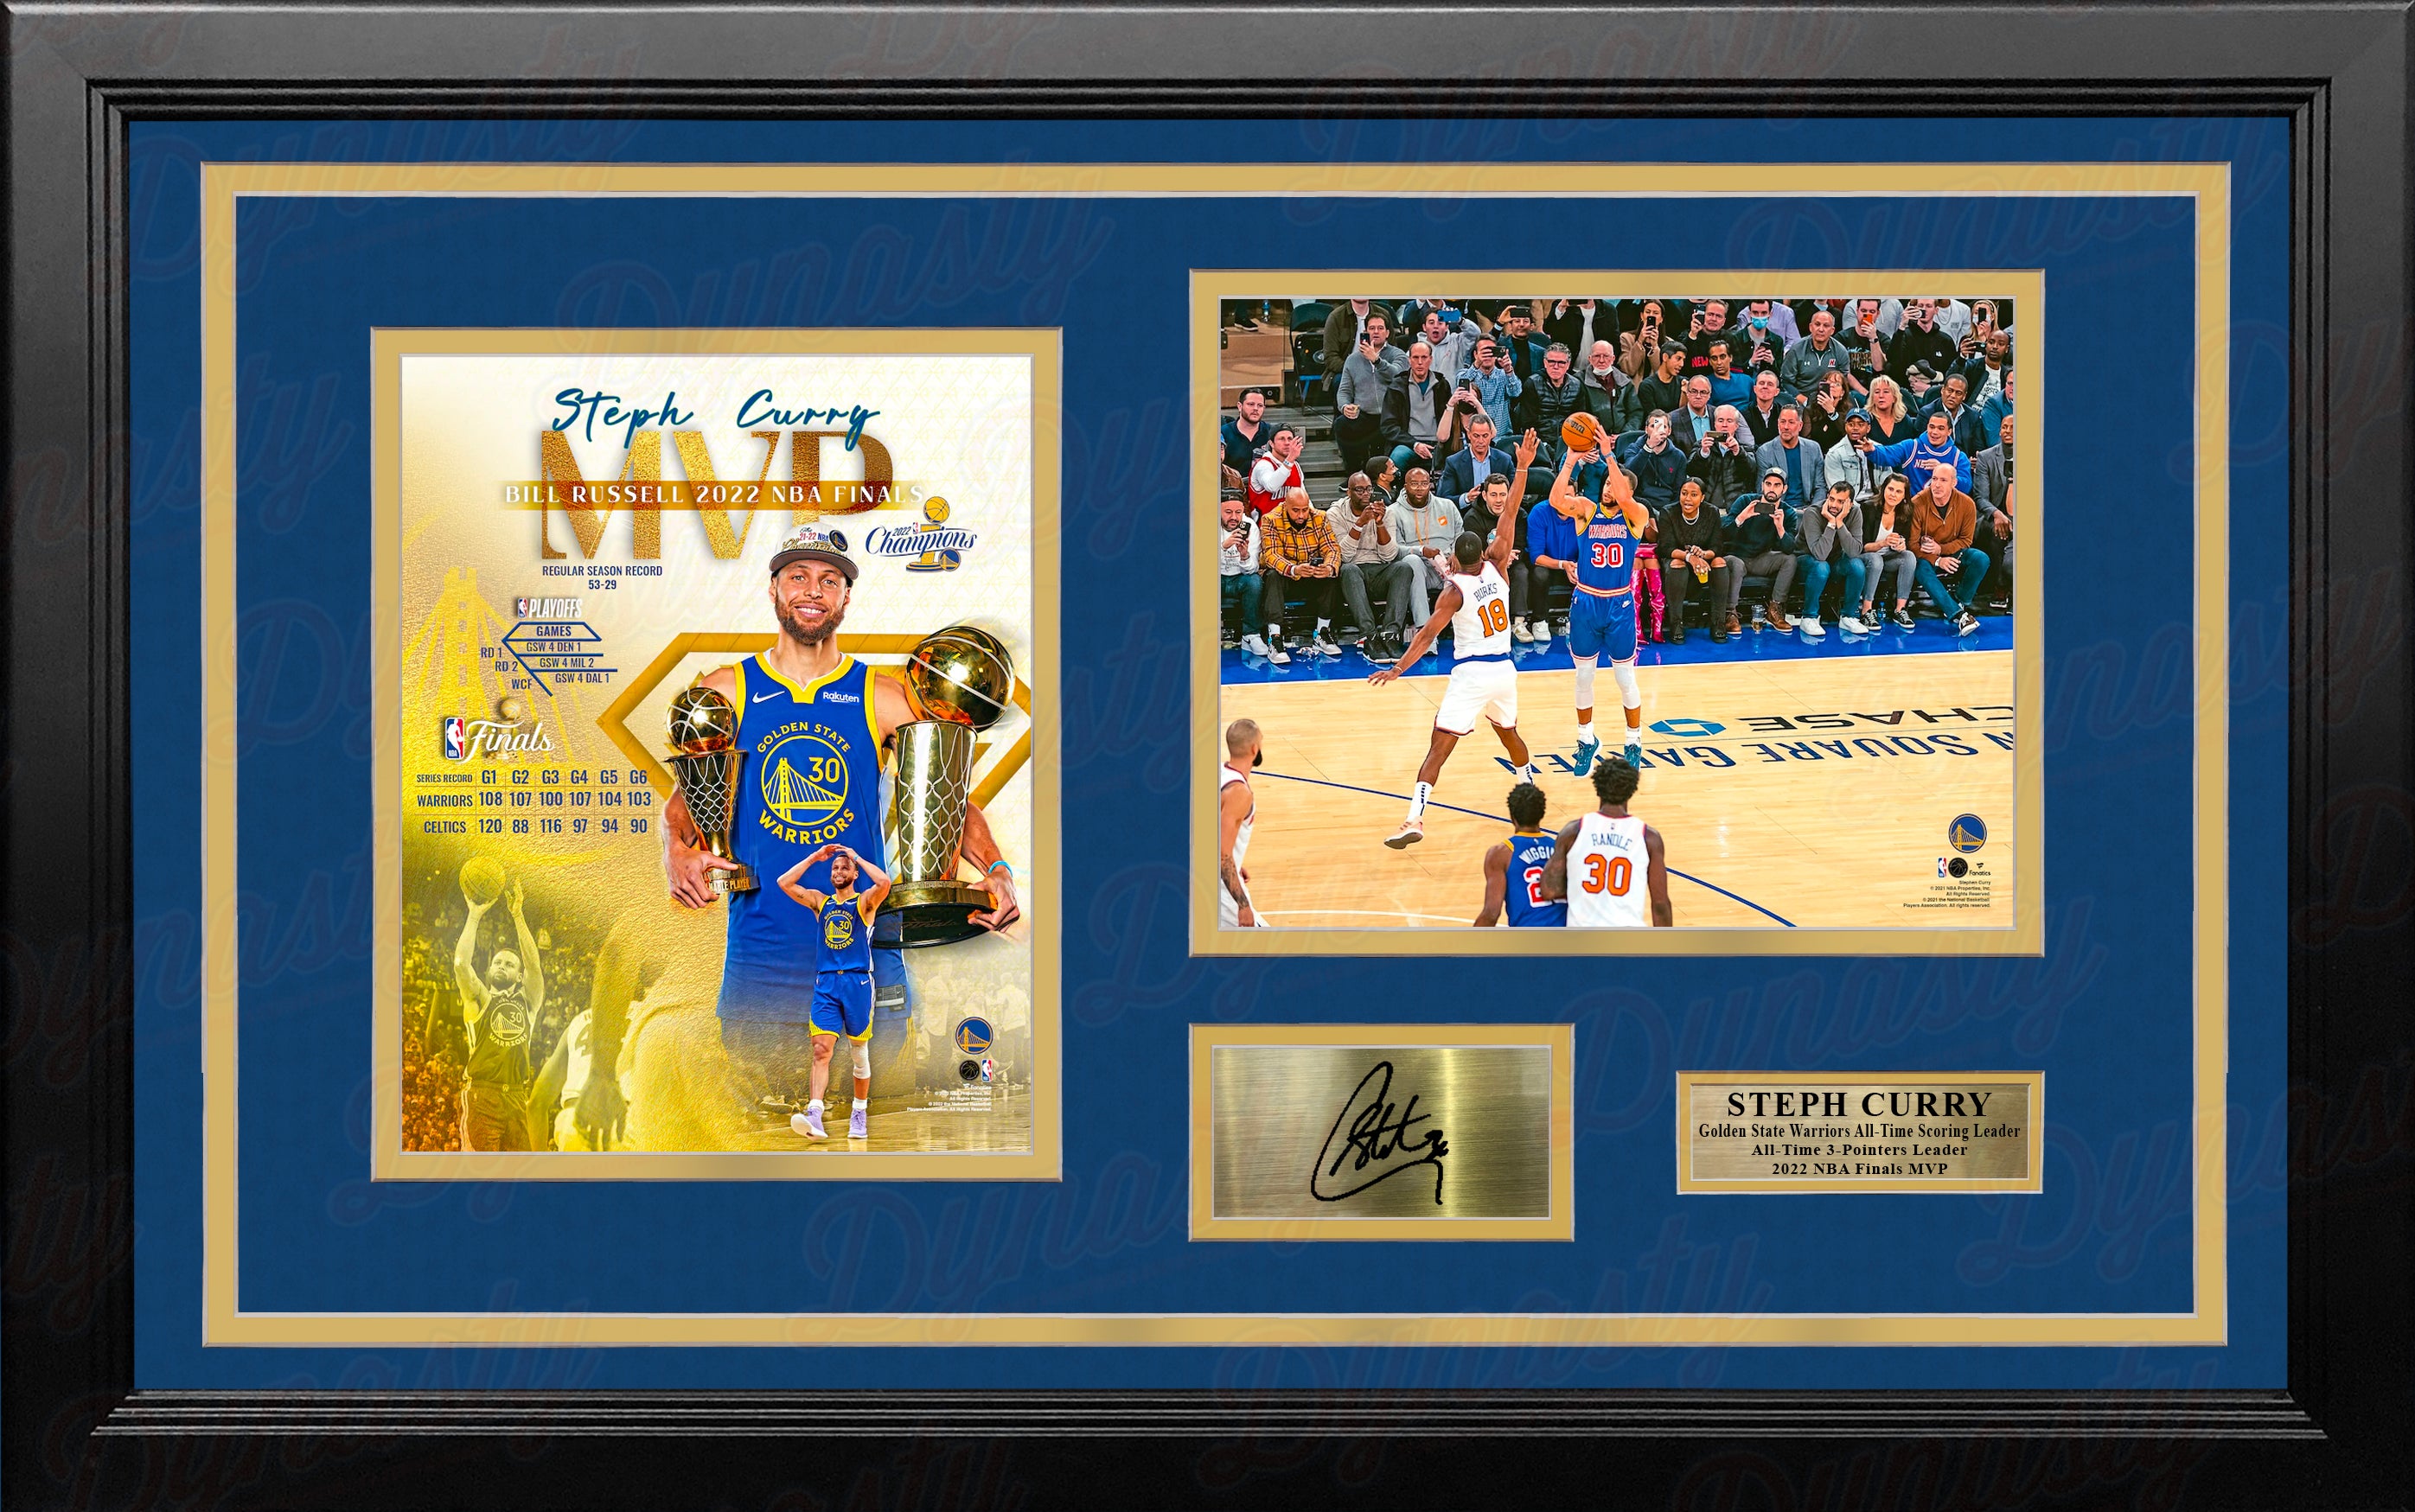 Lids Stephen Curry Golden State Warriors Fanatics Authentic Framed 16 x  20 NBA All-Time 3-Point Leader Floating Photo Collage